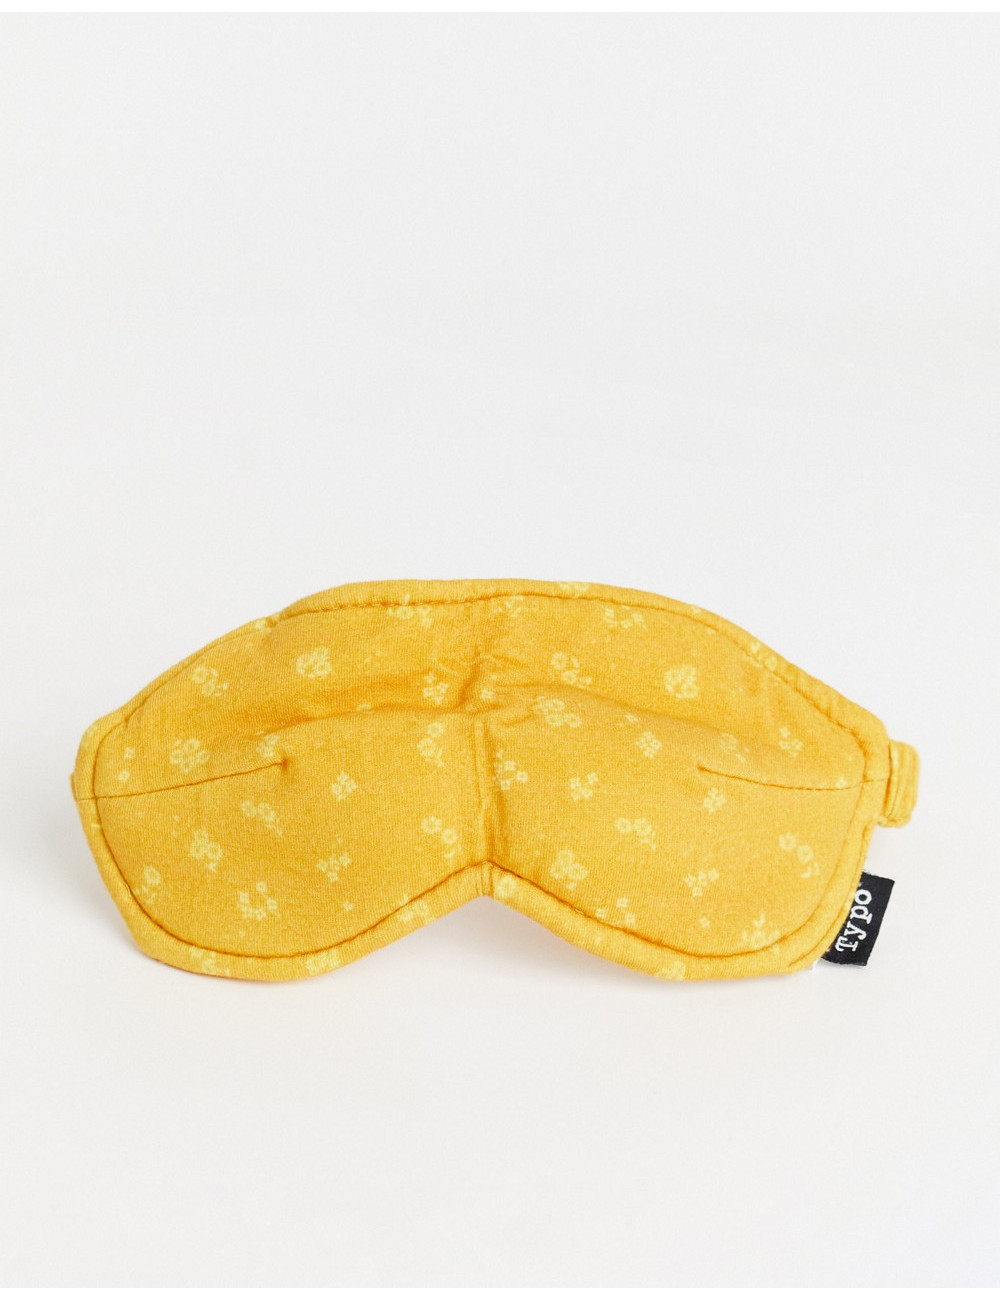 Typo eye mask with pouch...